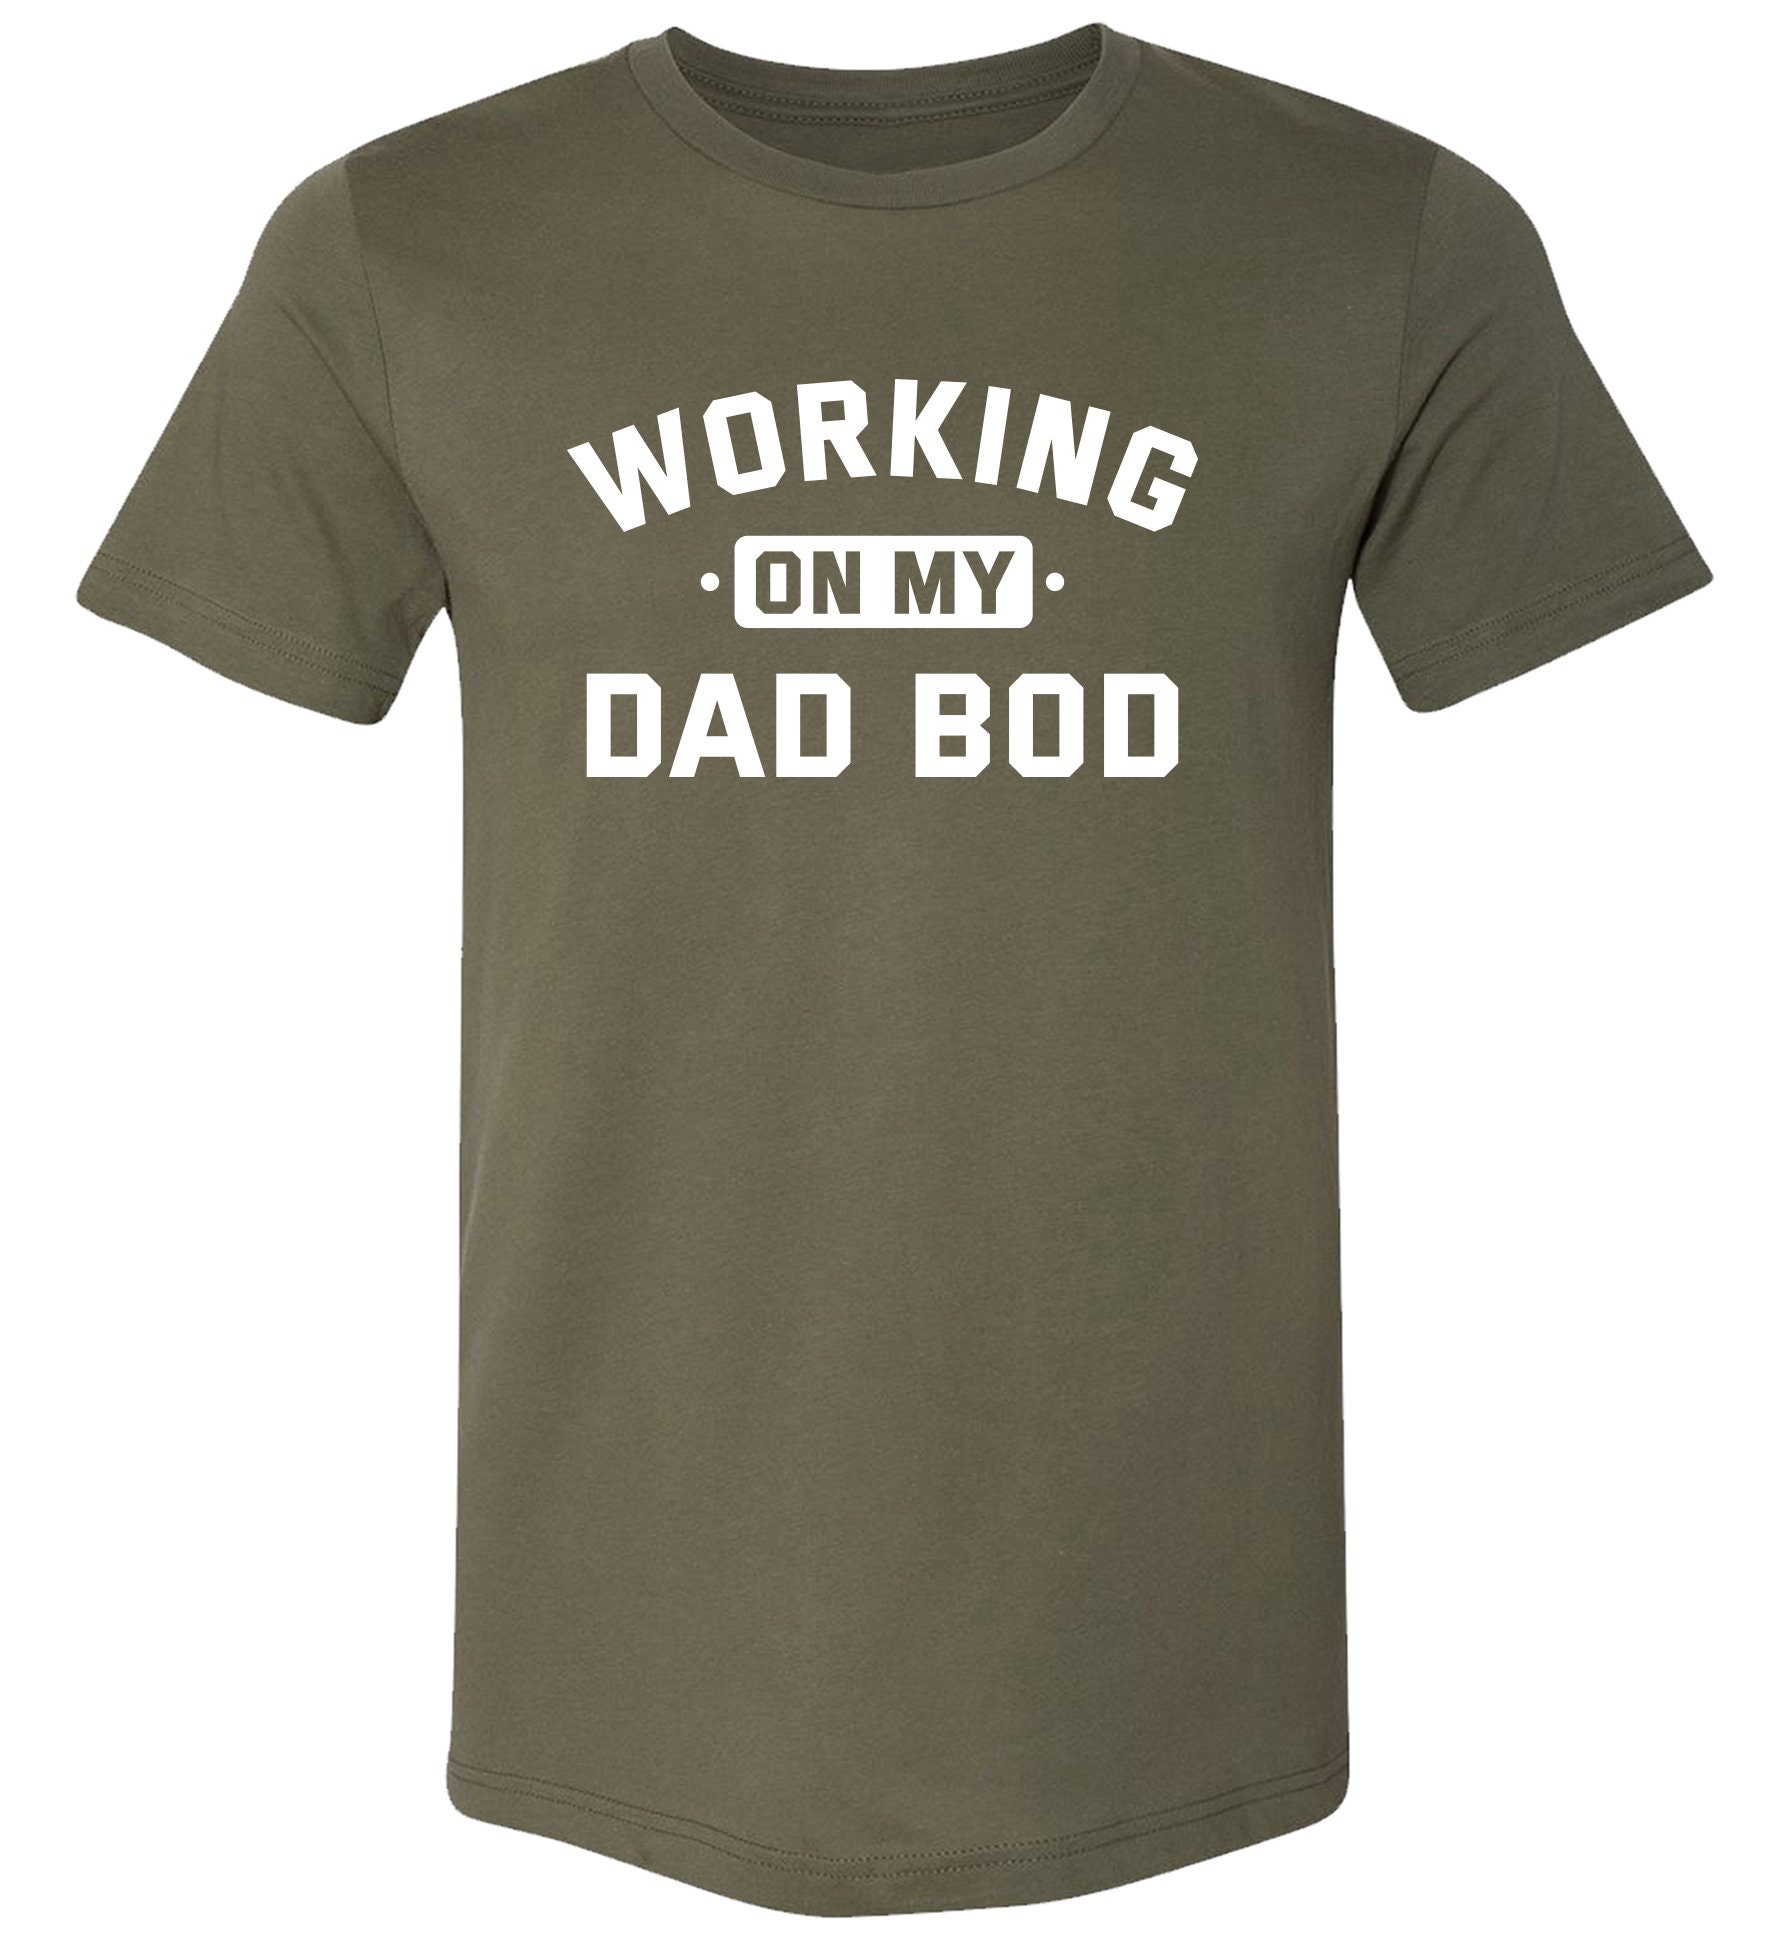 Discover Working On My Dad BOD Sarcastic T-Shirt - Graphic Father's Day Tees